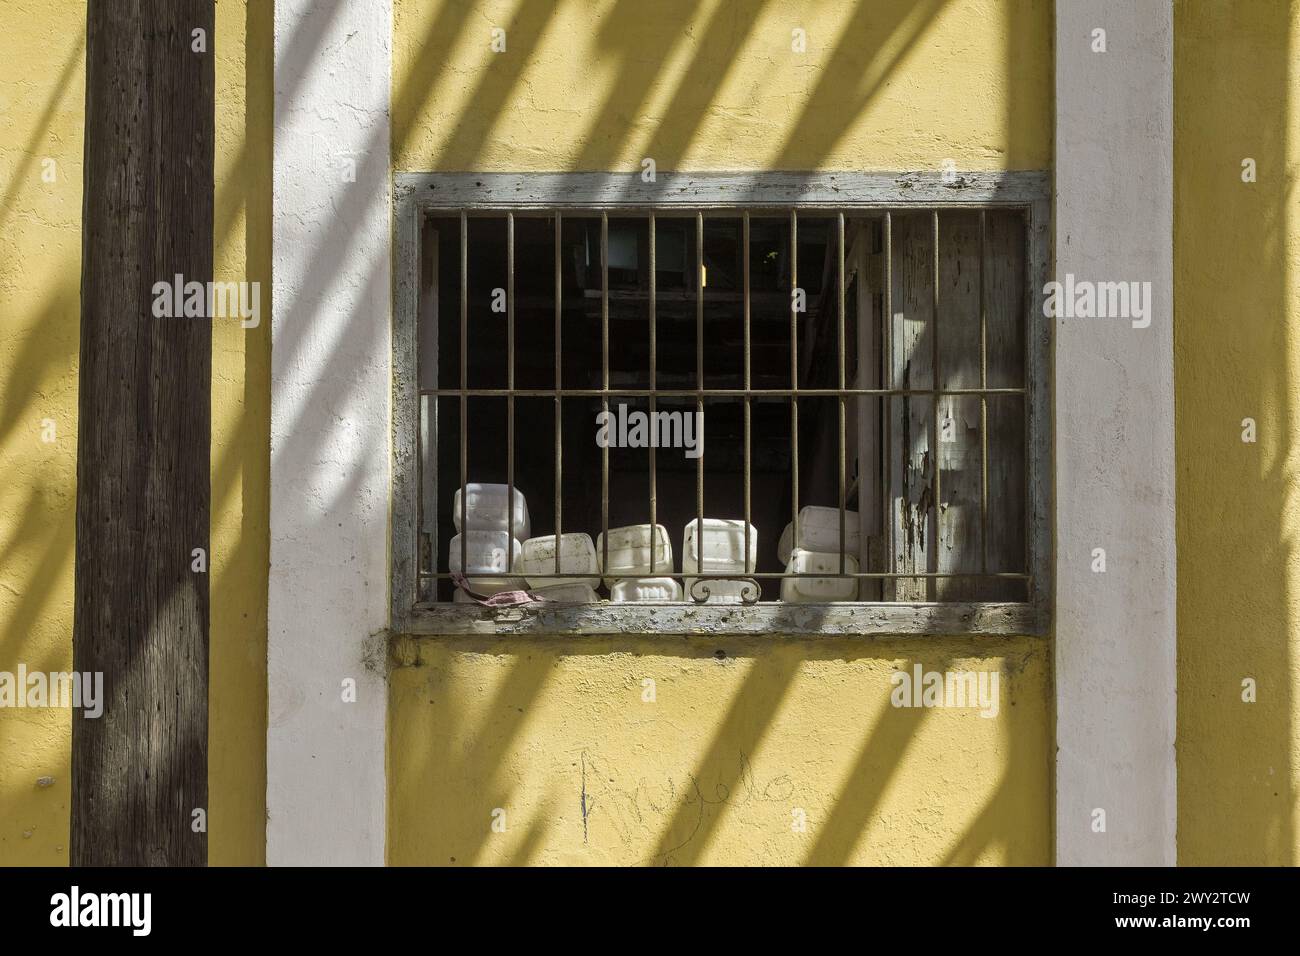 Diverse objects on a window protected by a metal grate, Havana, Cuba Stock Photo